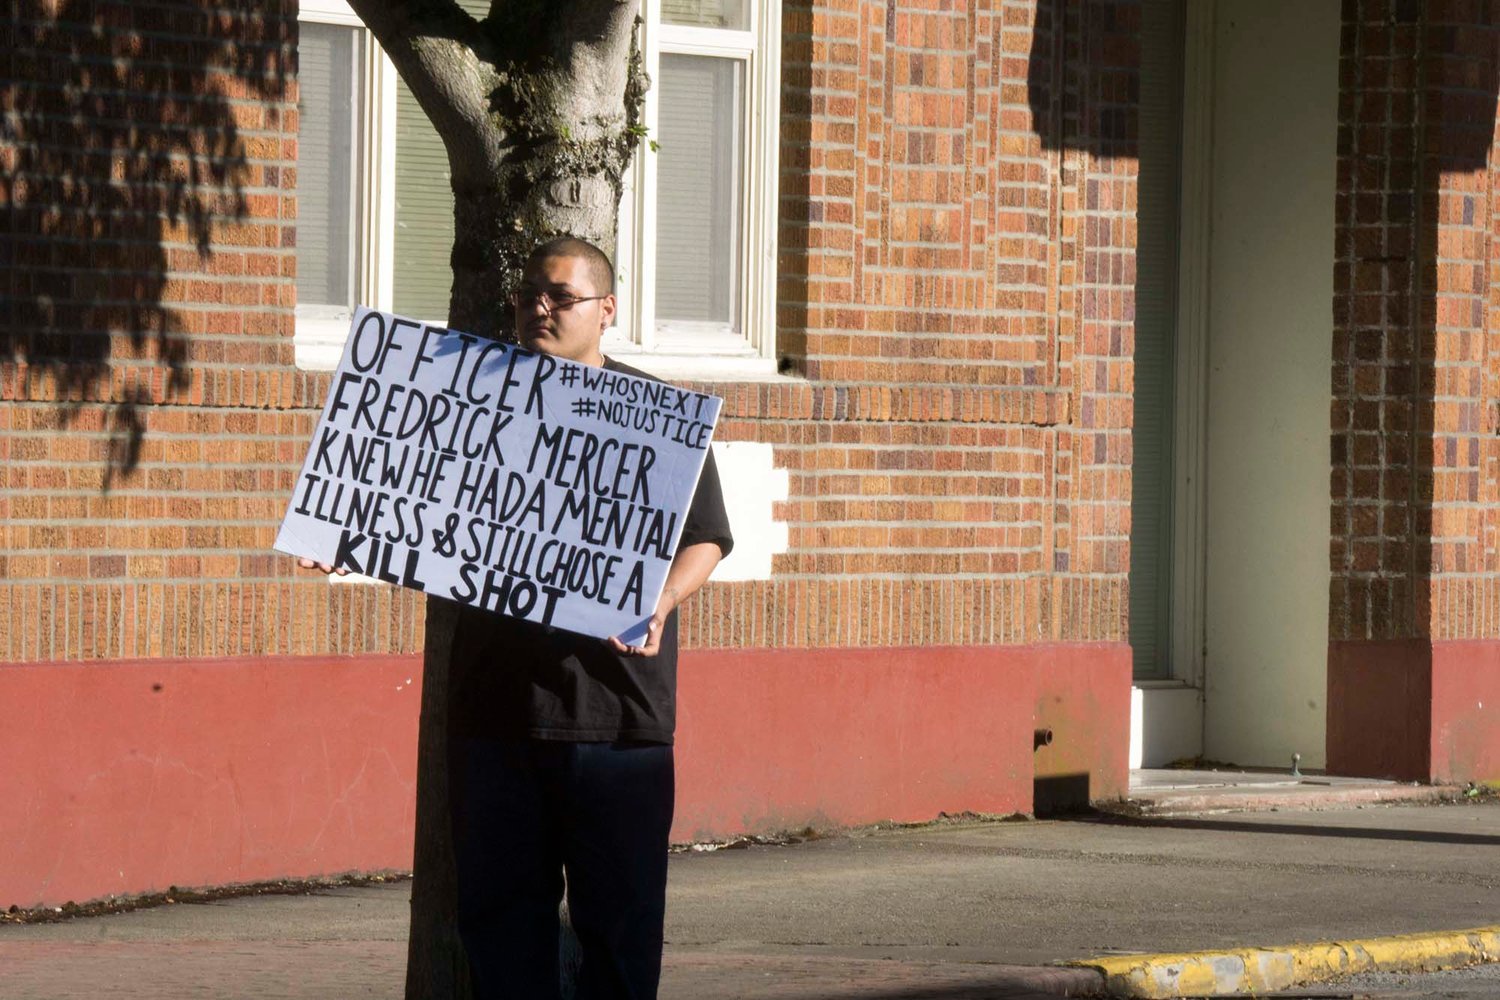 A man holds a sign that calls out Centralia Police officer Fredrick Mercer.